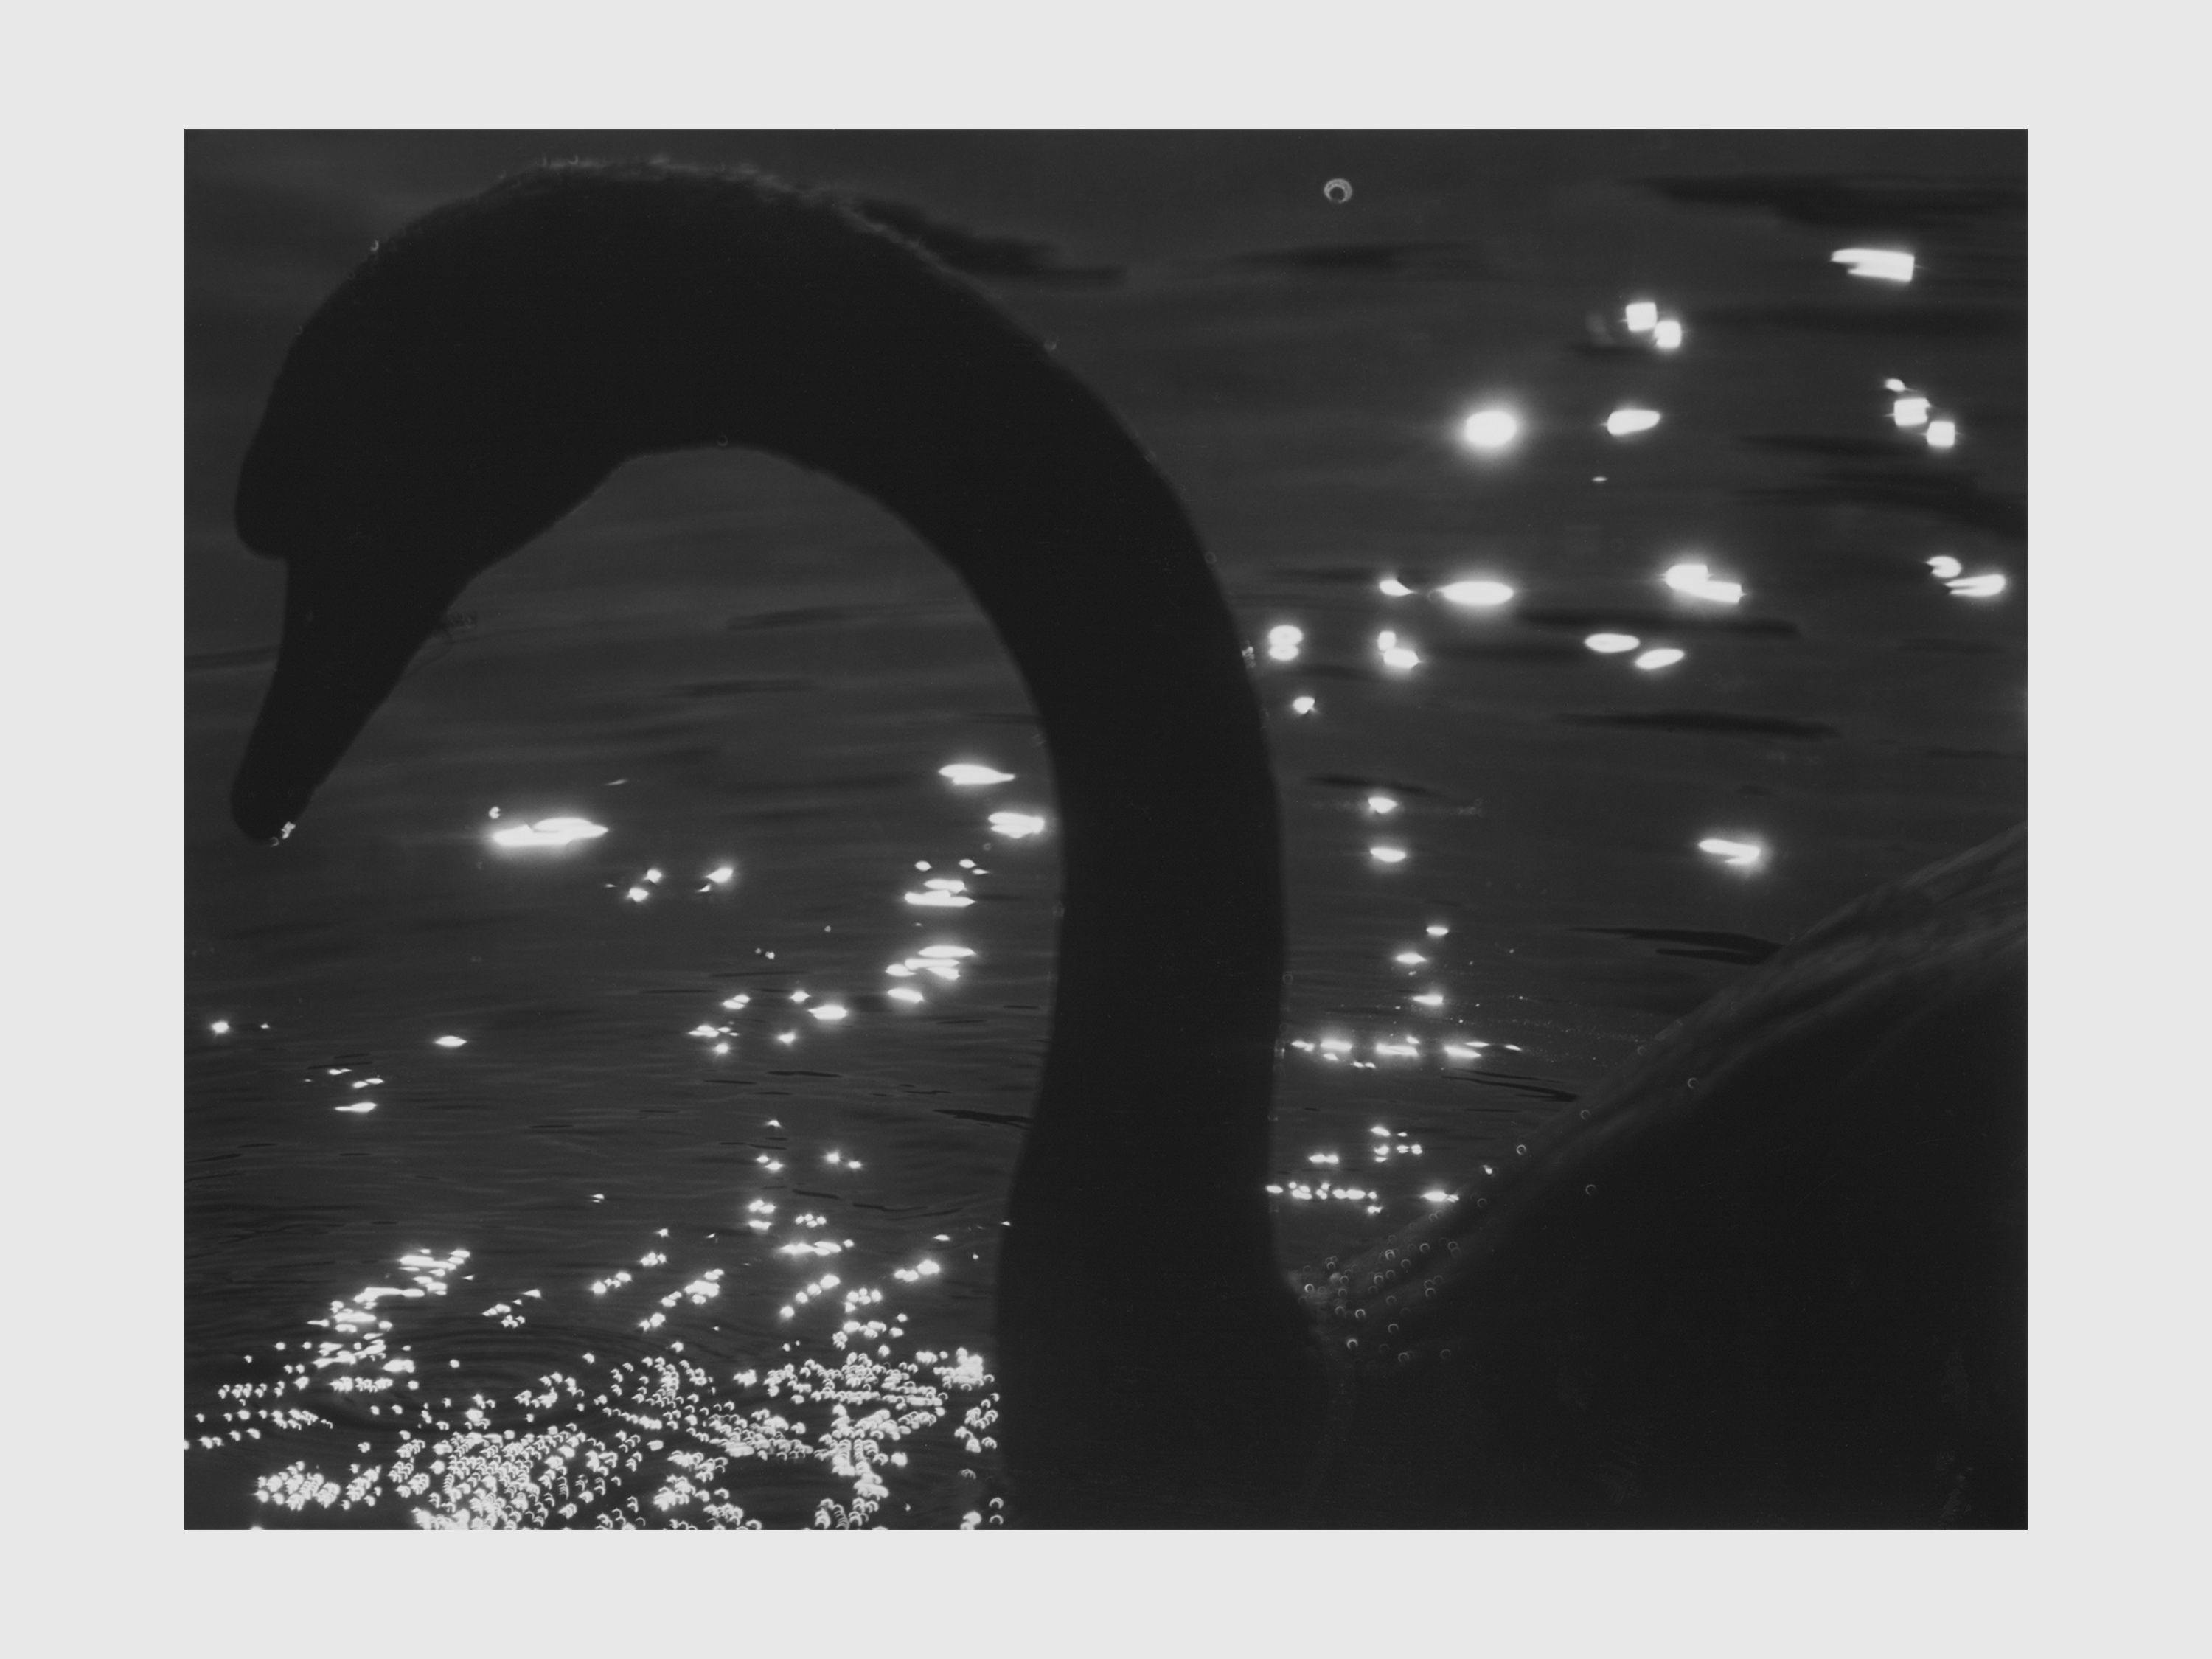 A photograph by Roy de Carava titled Swan, water lights, dated 1995.